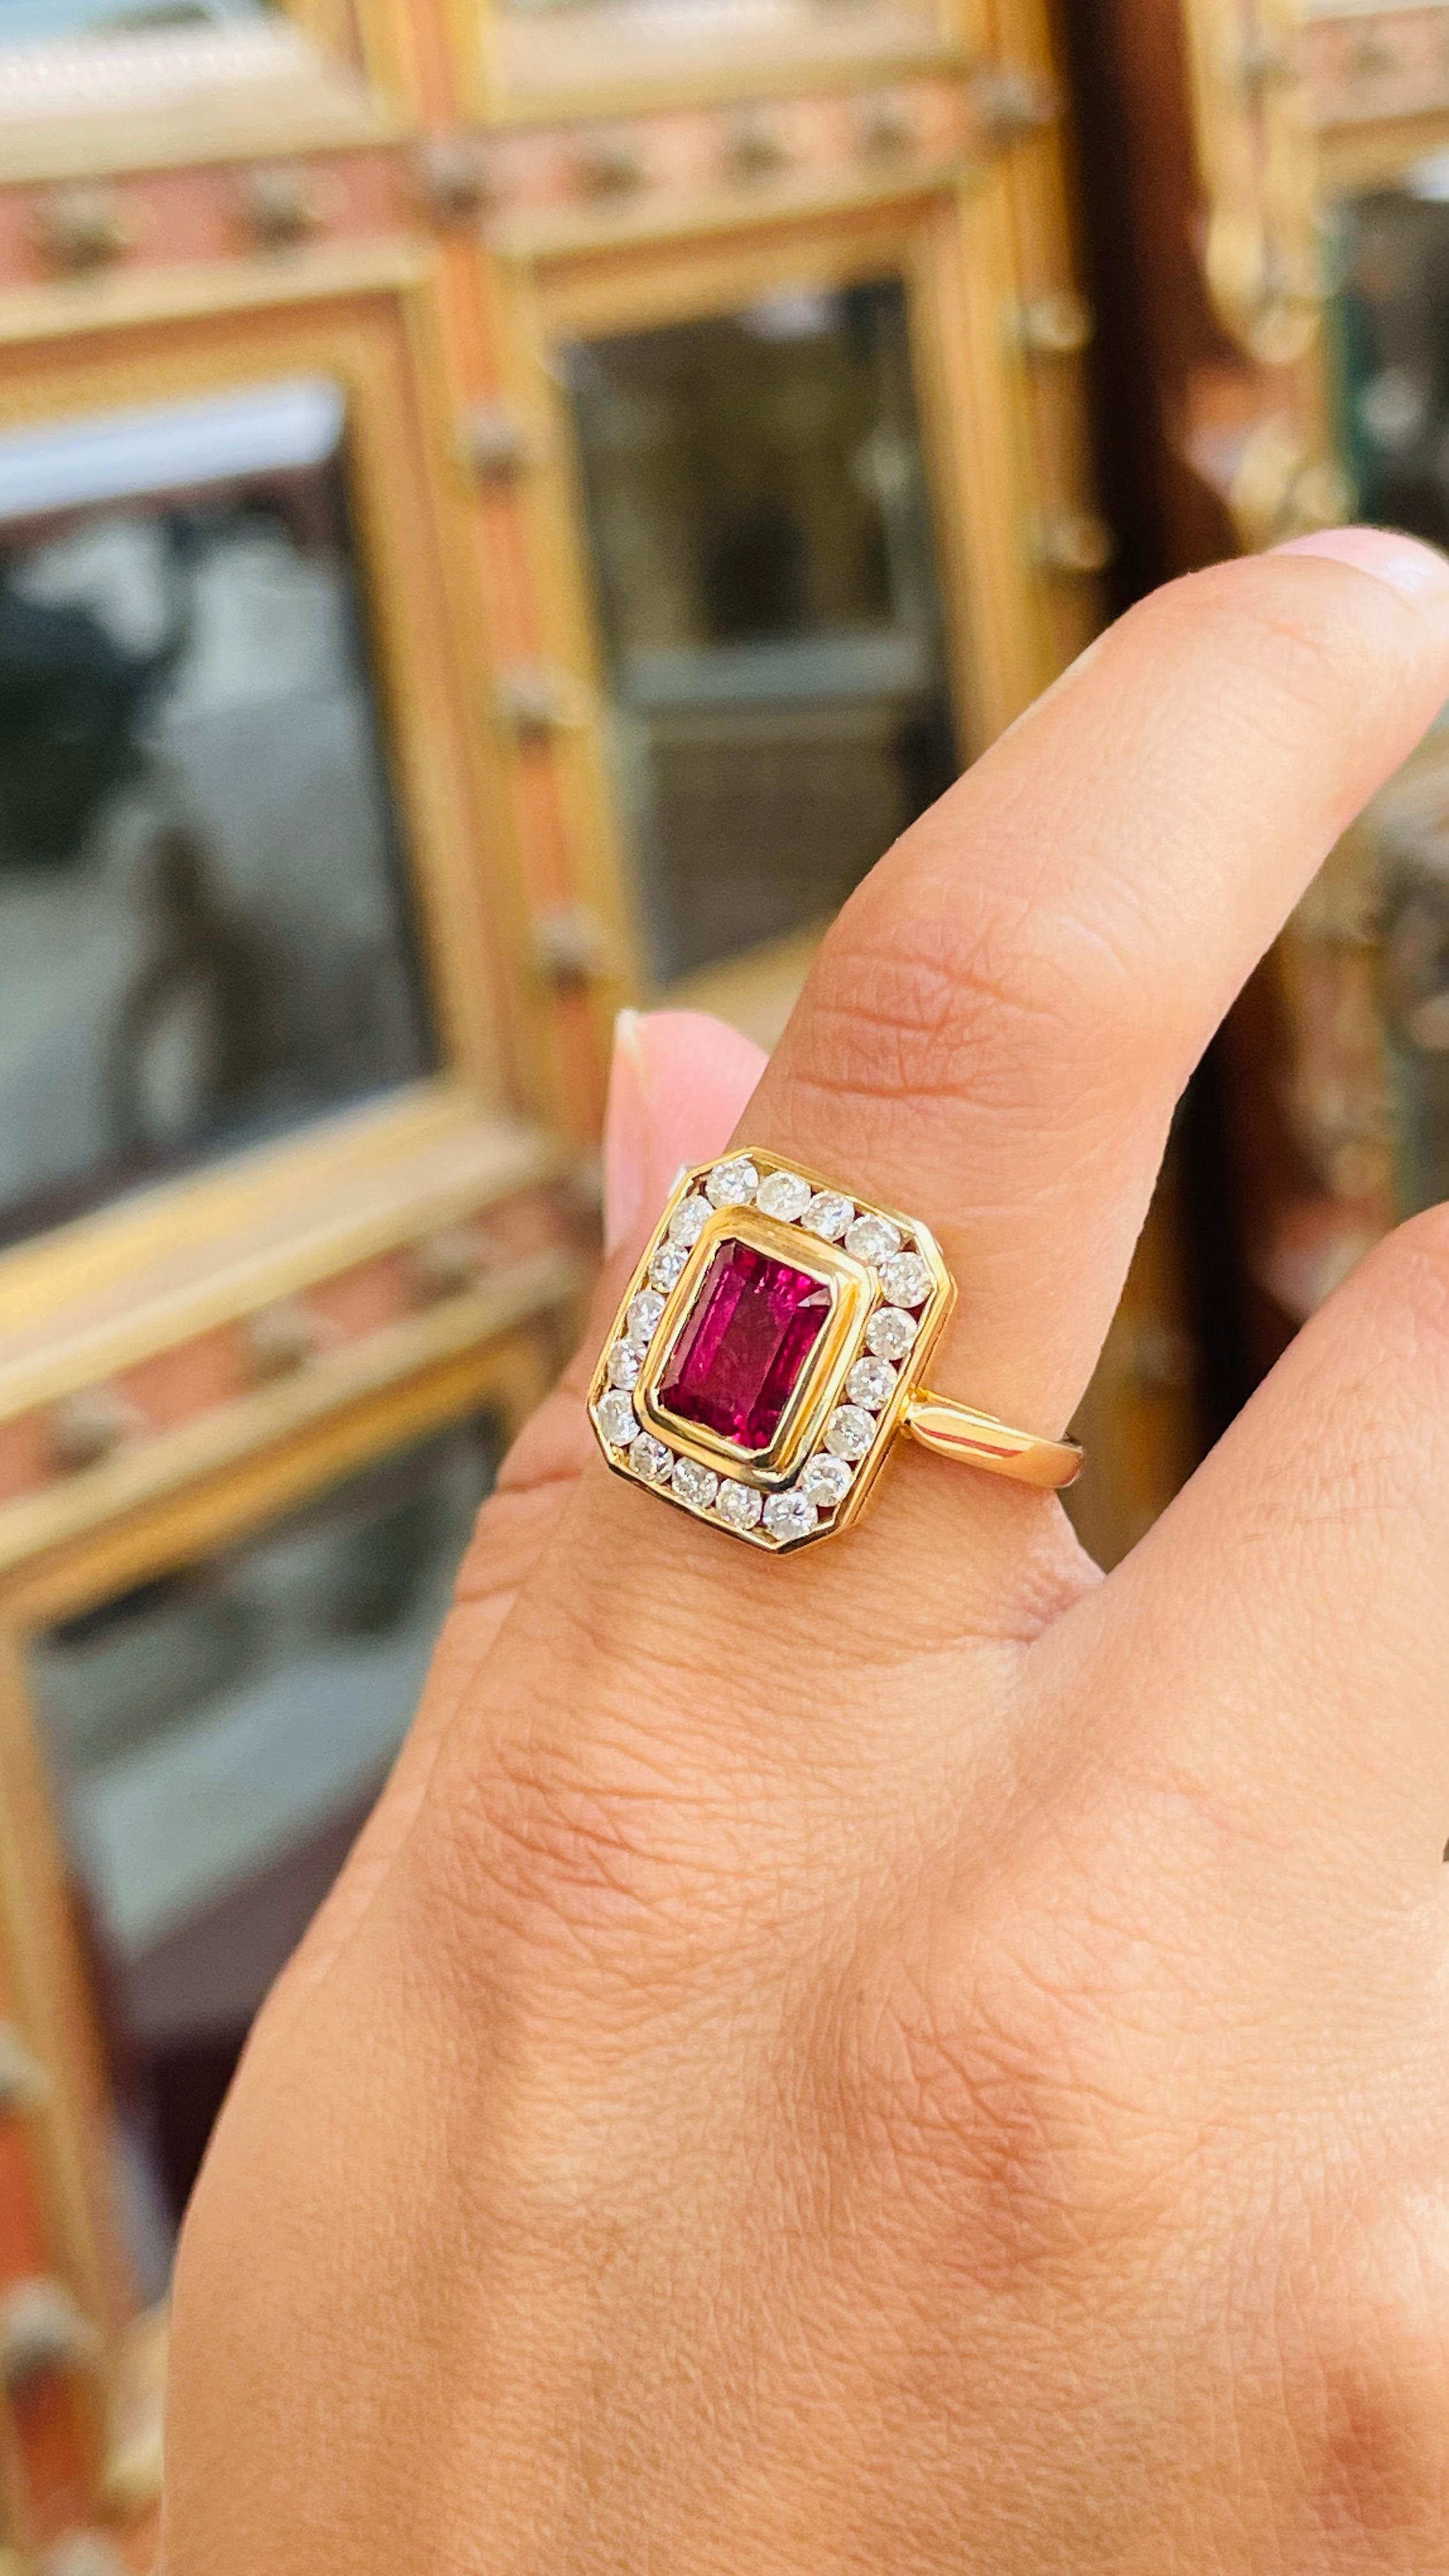 For Sale:  18K Yellow Gold Octagon Cut Ruby Diamond Engagement Ring 3